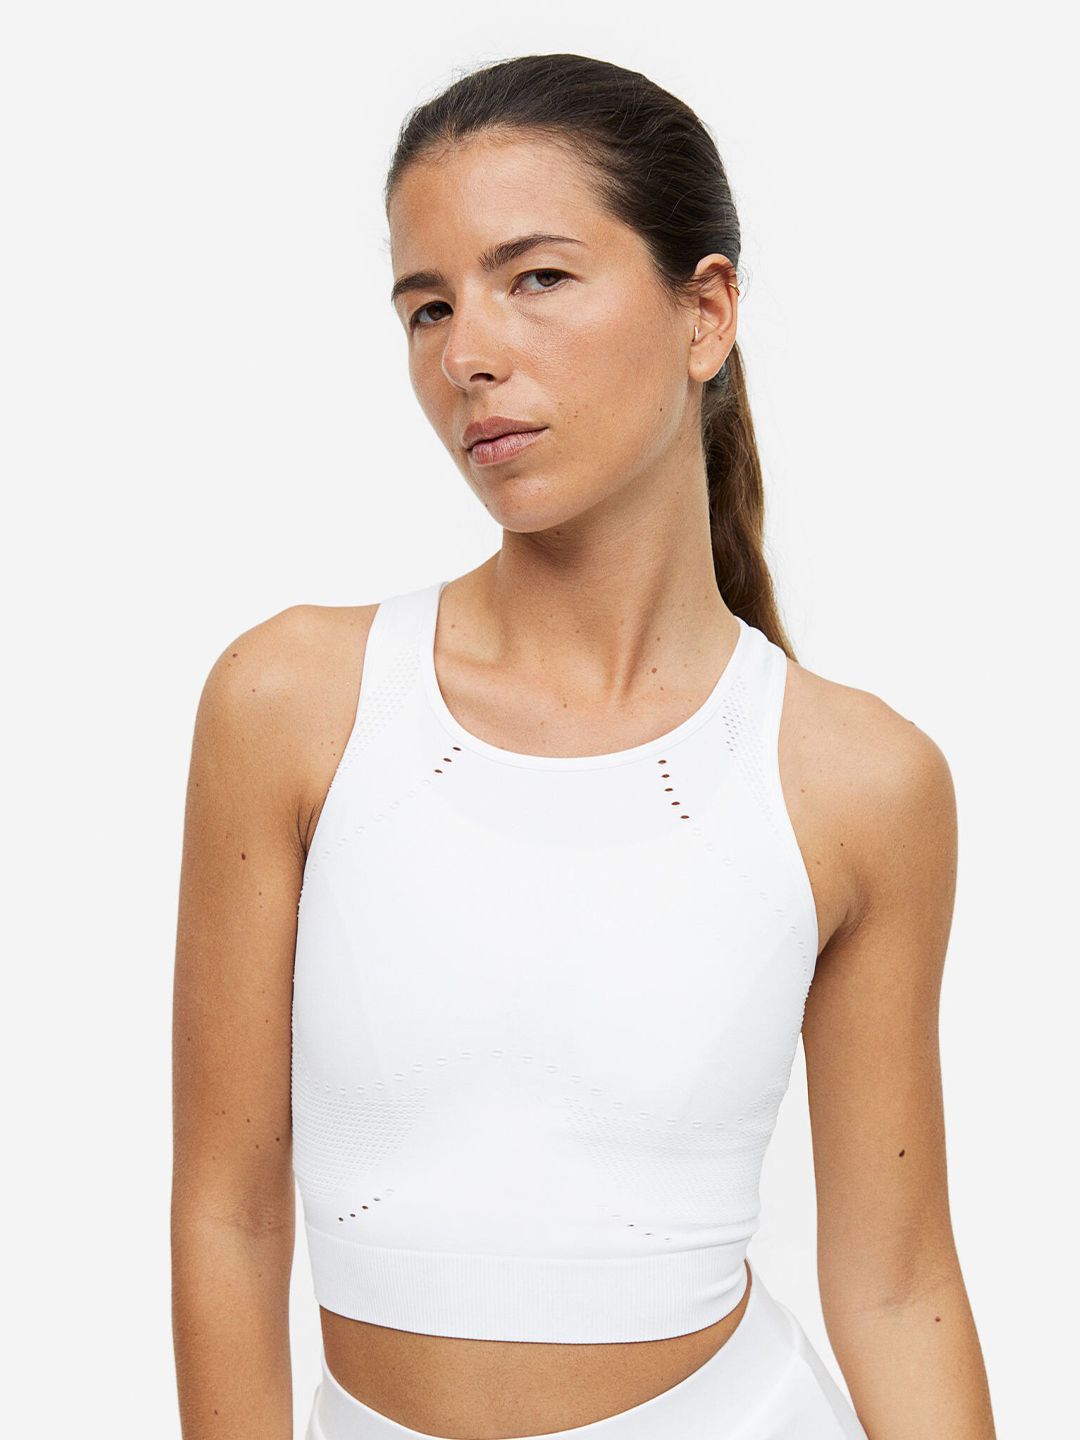 H&M DryMove Seamless Cropped Sports Top Price in India